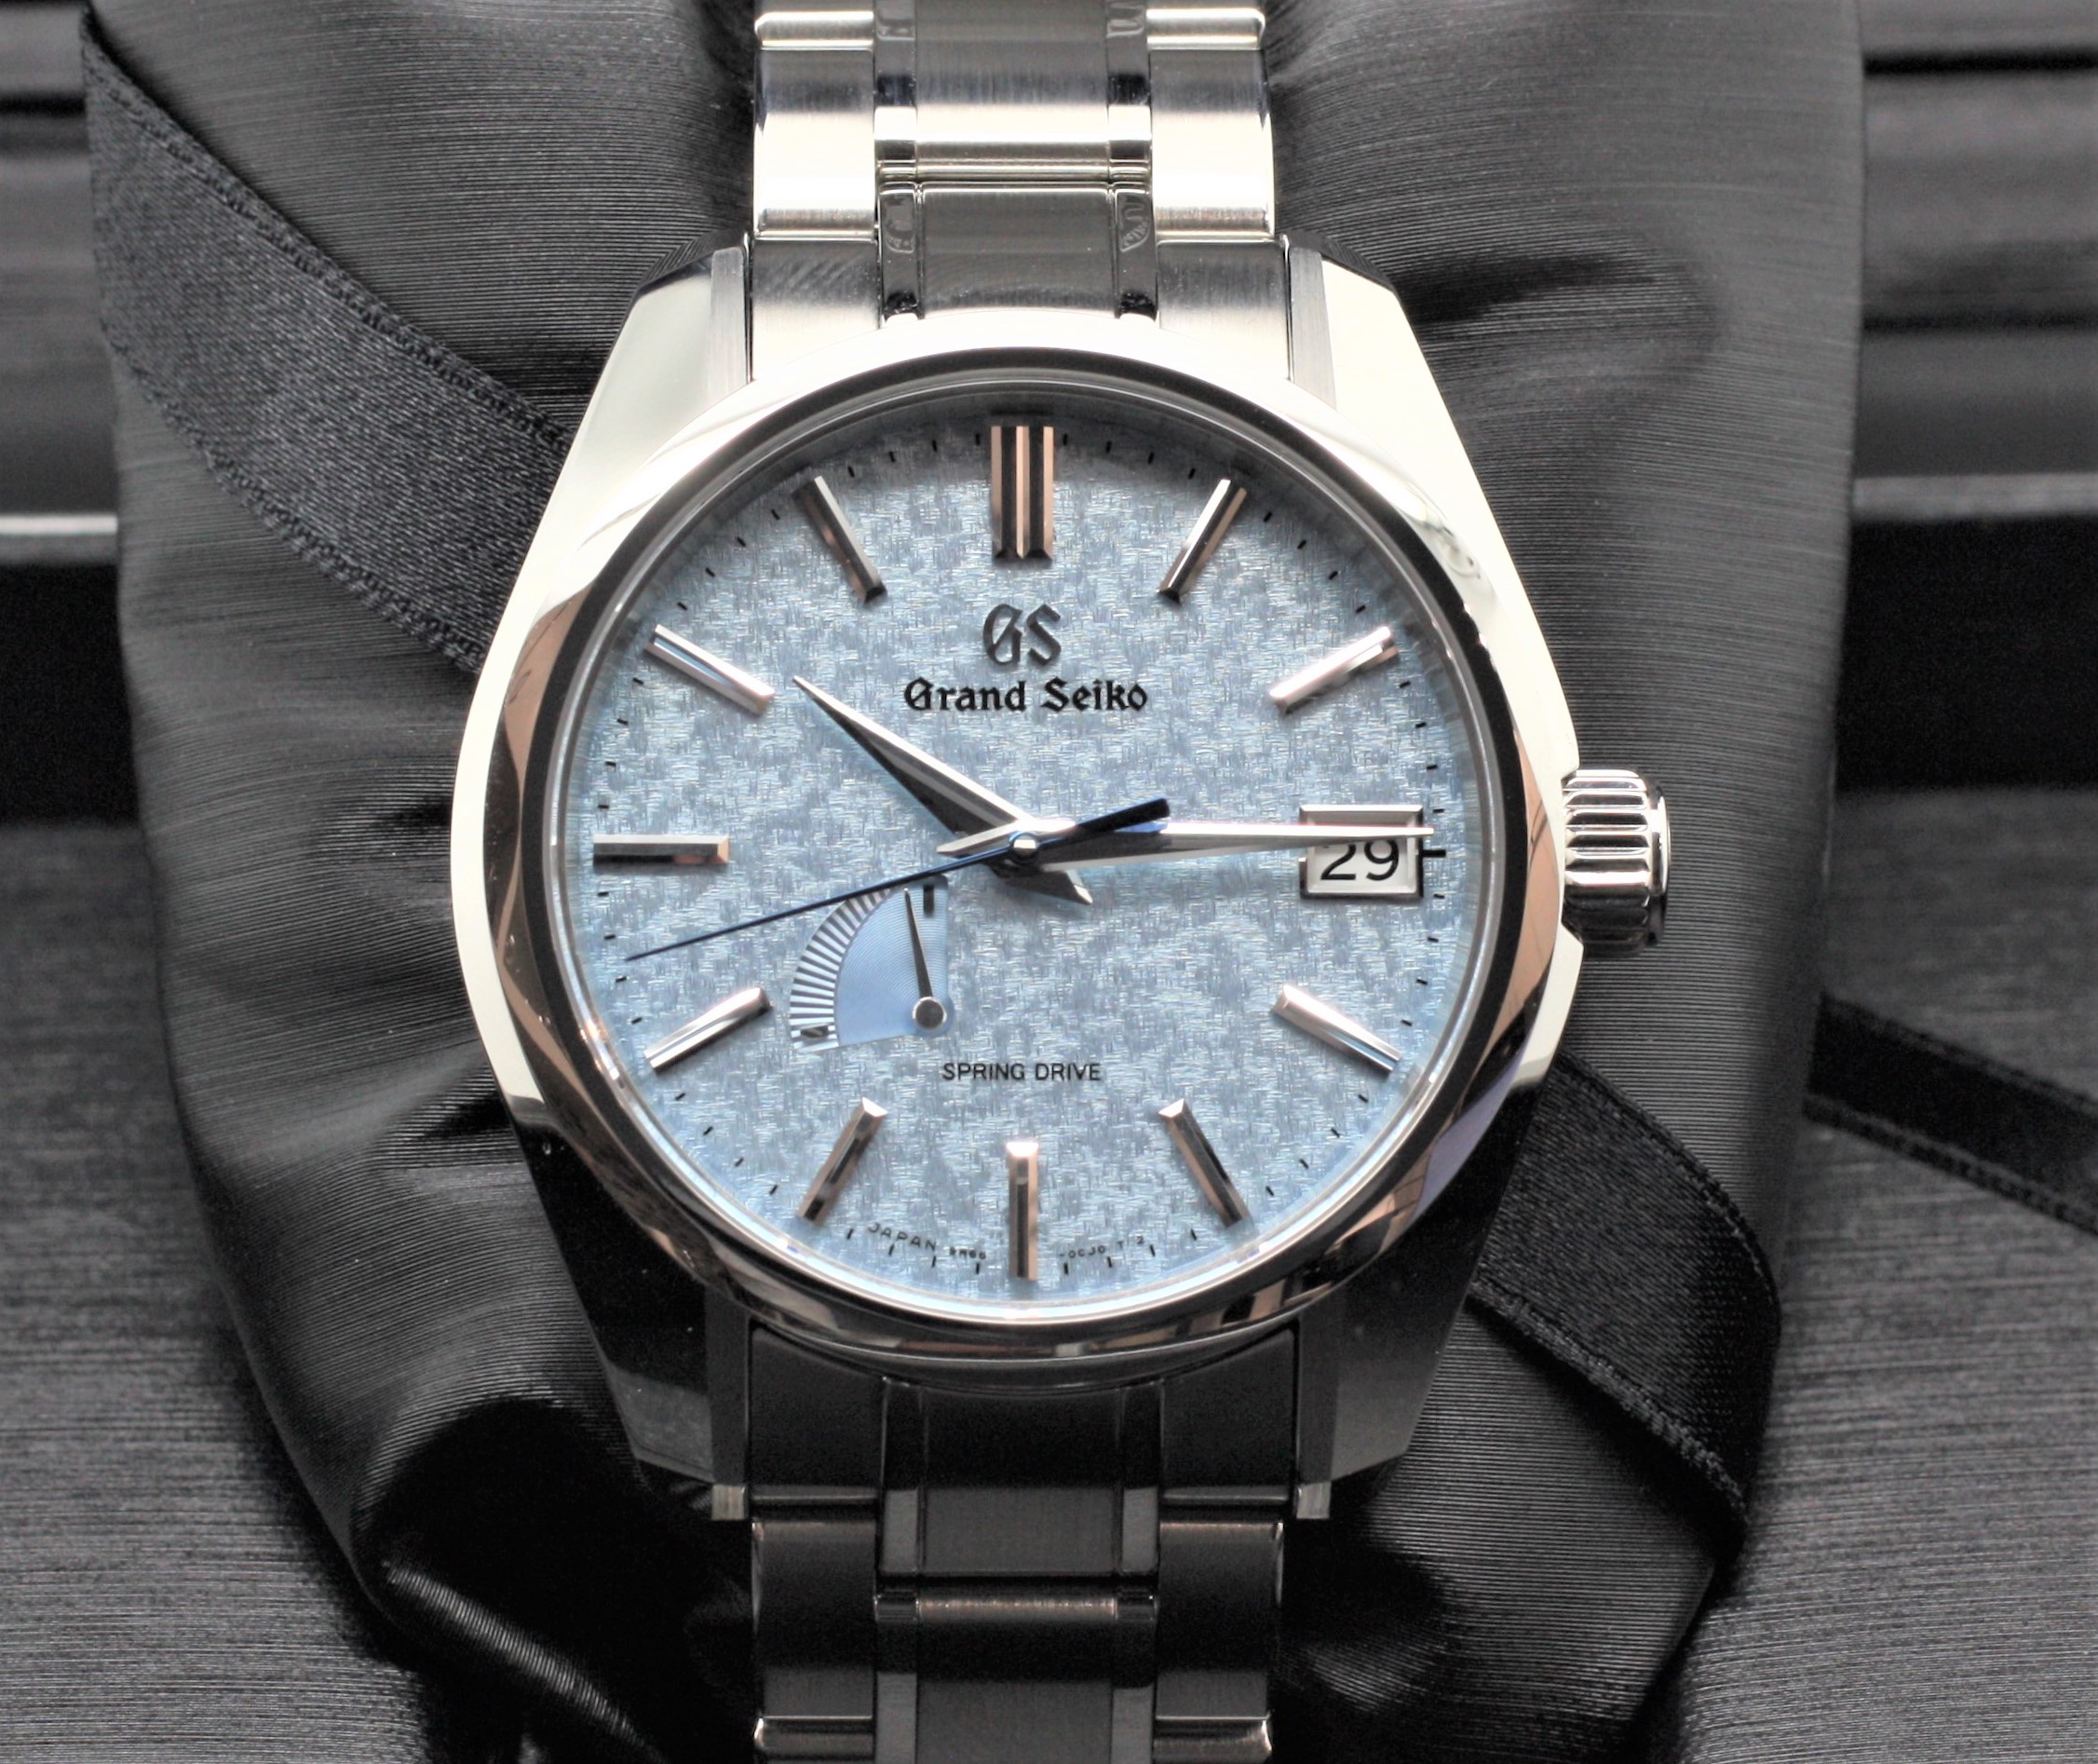 FOR SALE - Pre Owned Grand Seiko SBGA387 US Limited Edition $6500 OBO |  WatchCharts